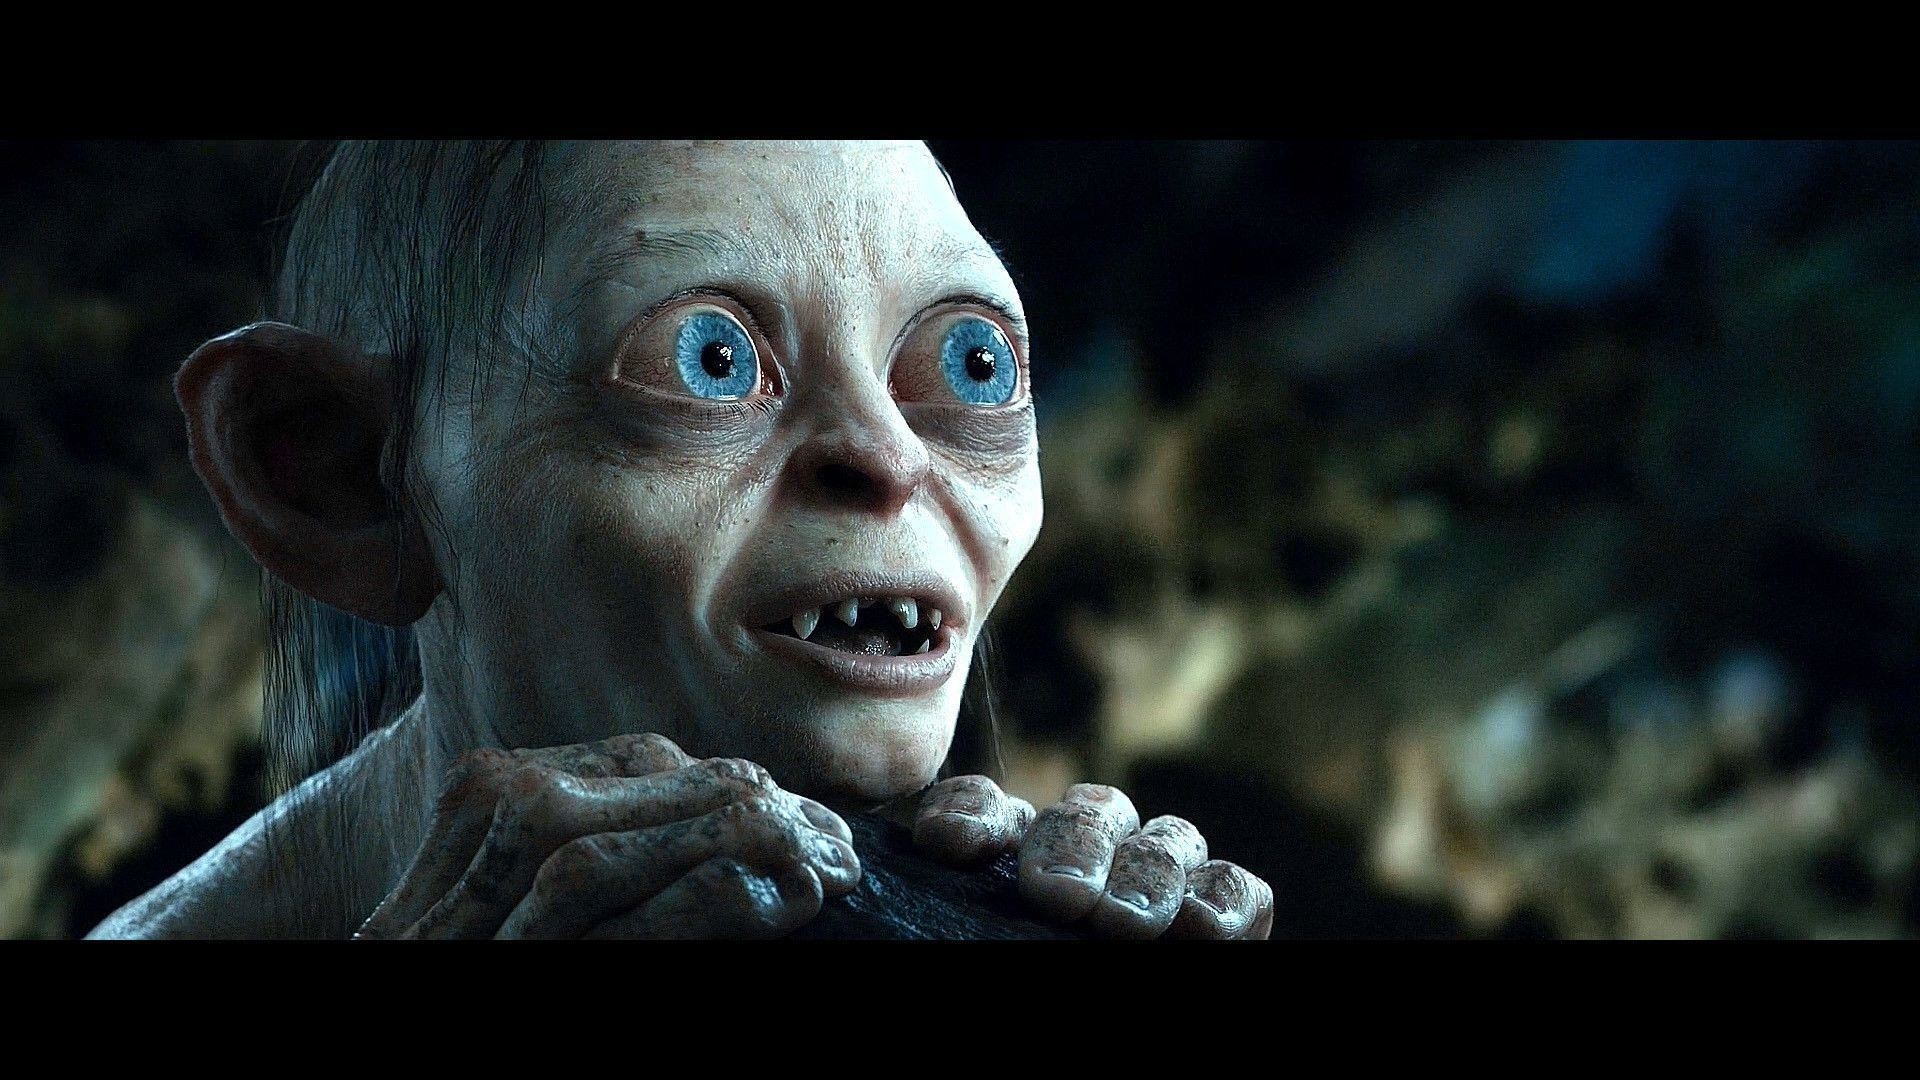 Gollum Lord Of The Rings Wallpapers